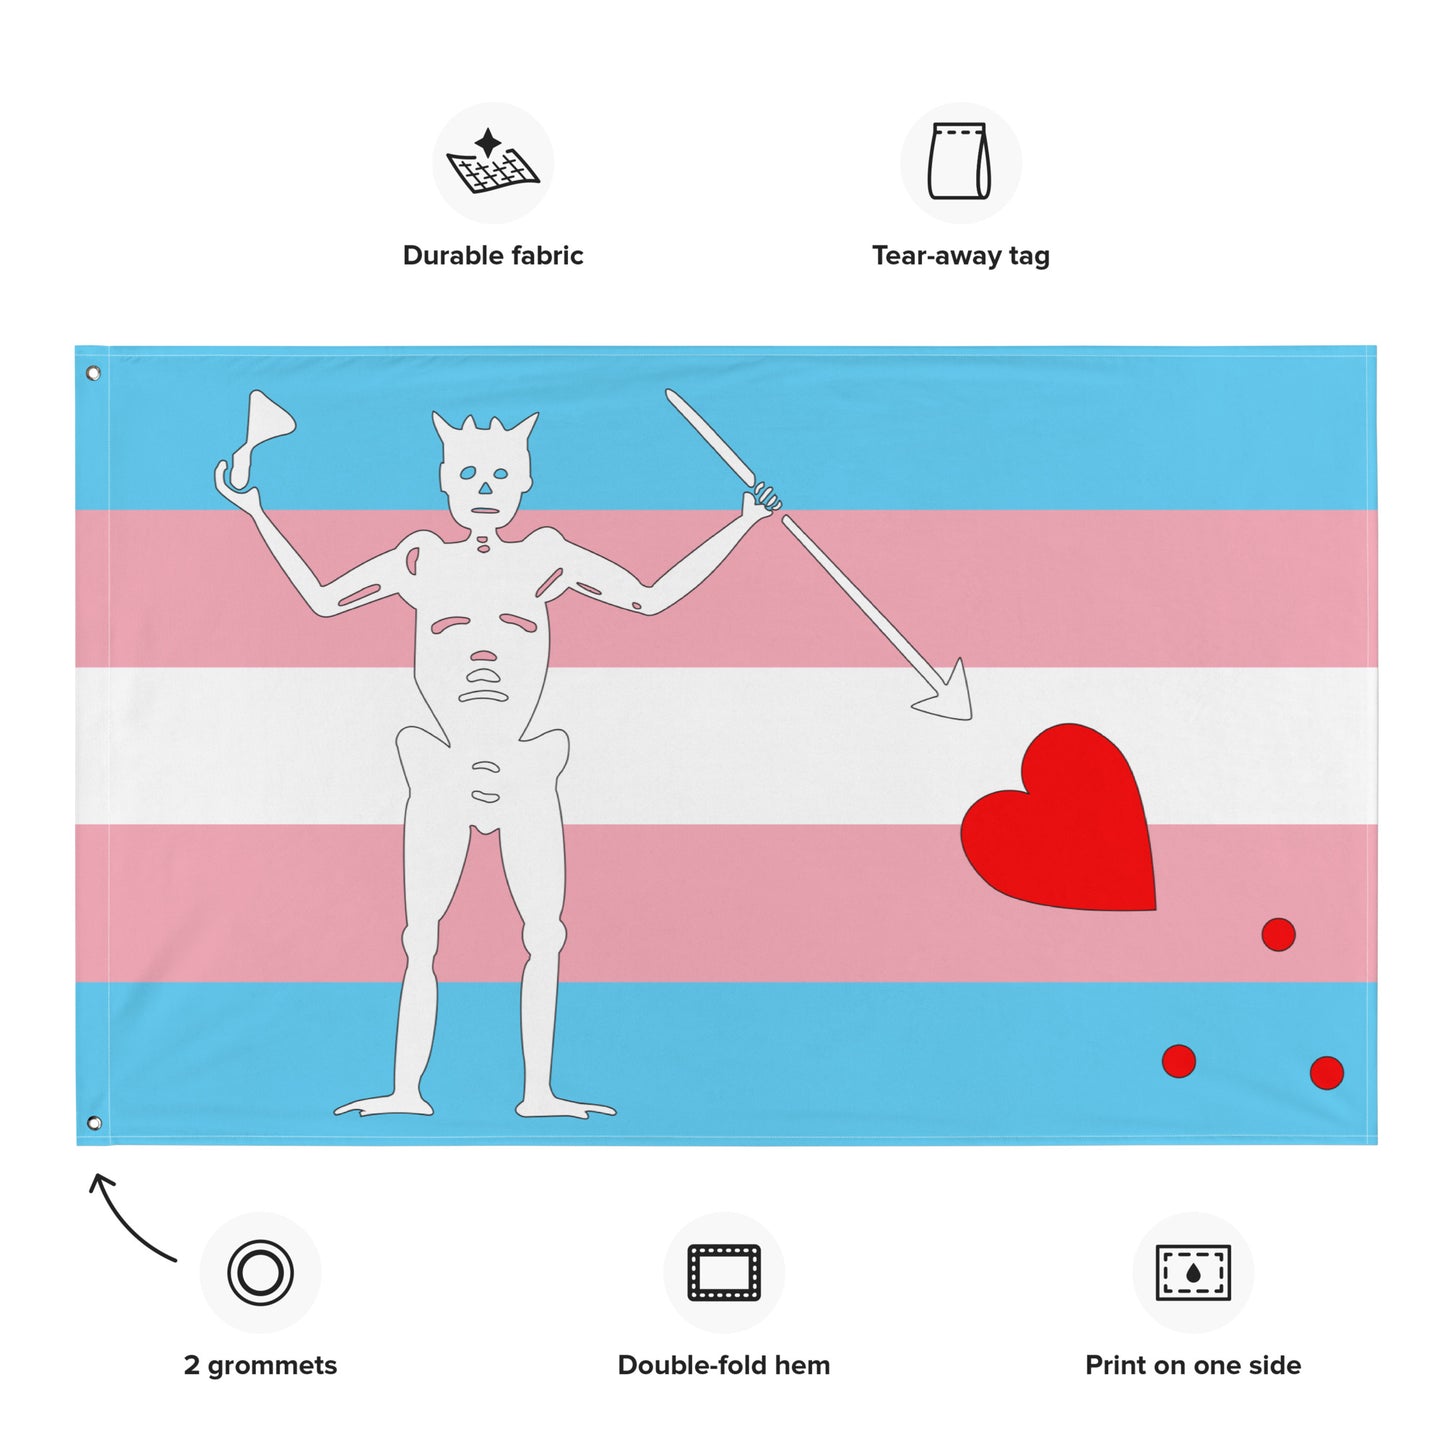 the transgender flag with blackbeard's symbol surrounded by the specifications of "durable fabric, tear-away tag, 2 grommets, double-fold hem, print on one side"